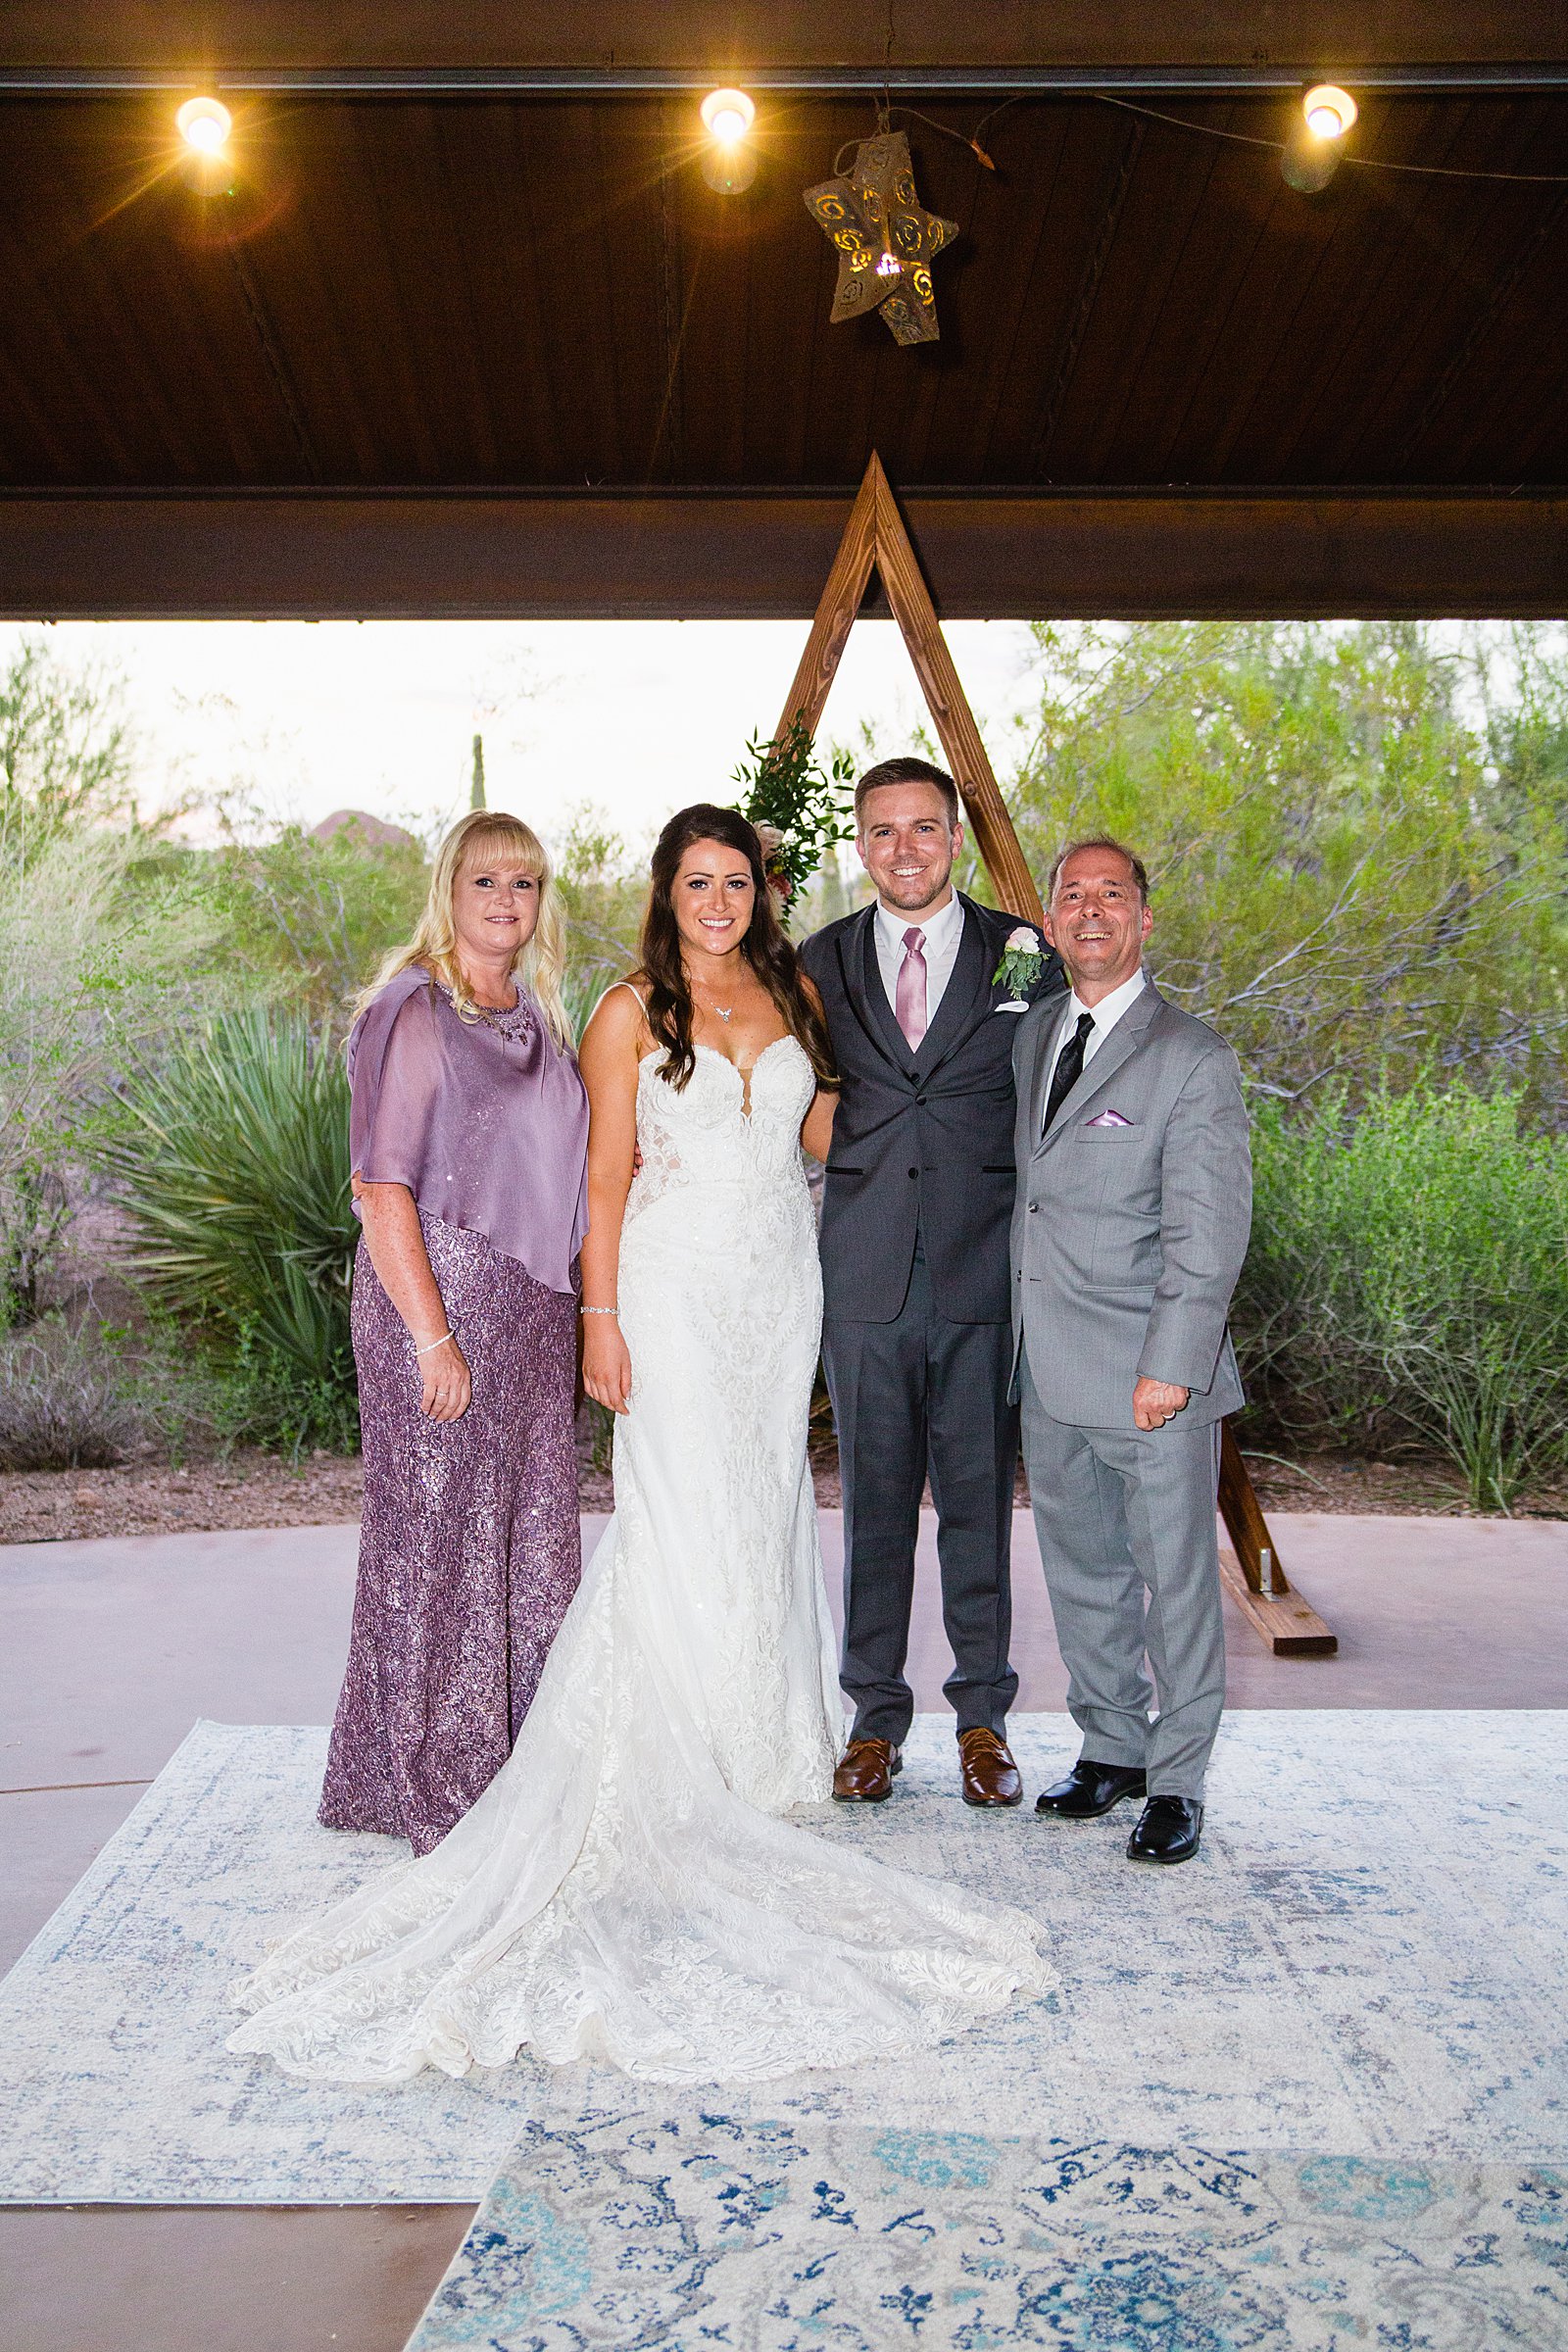 Bride and groom pose with their close family members at their Desert Botanical Garden's wedding by Phoenix wedding photographer PMA Photography.